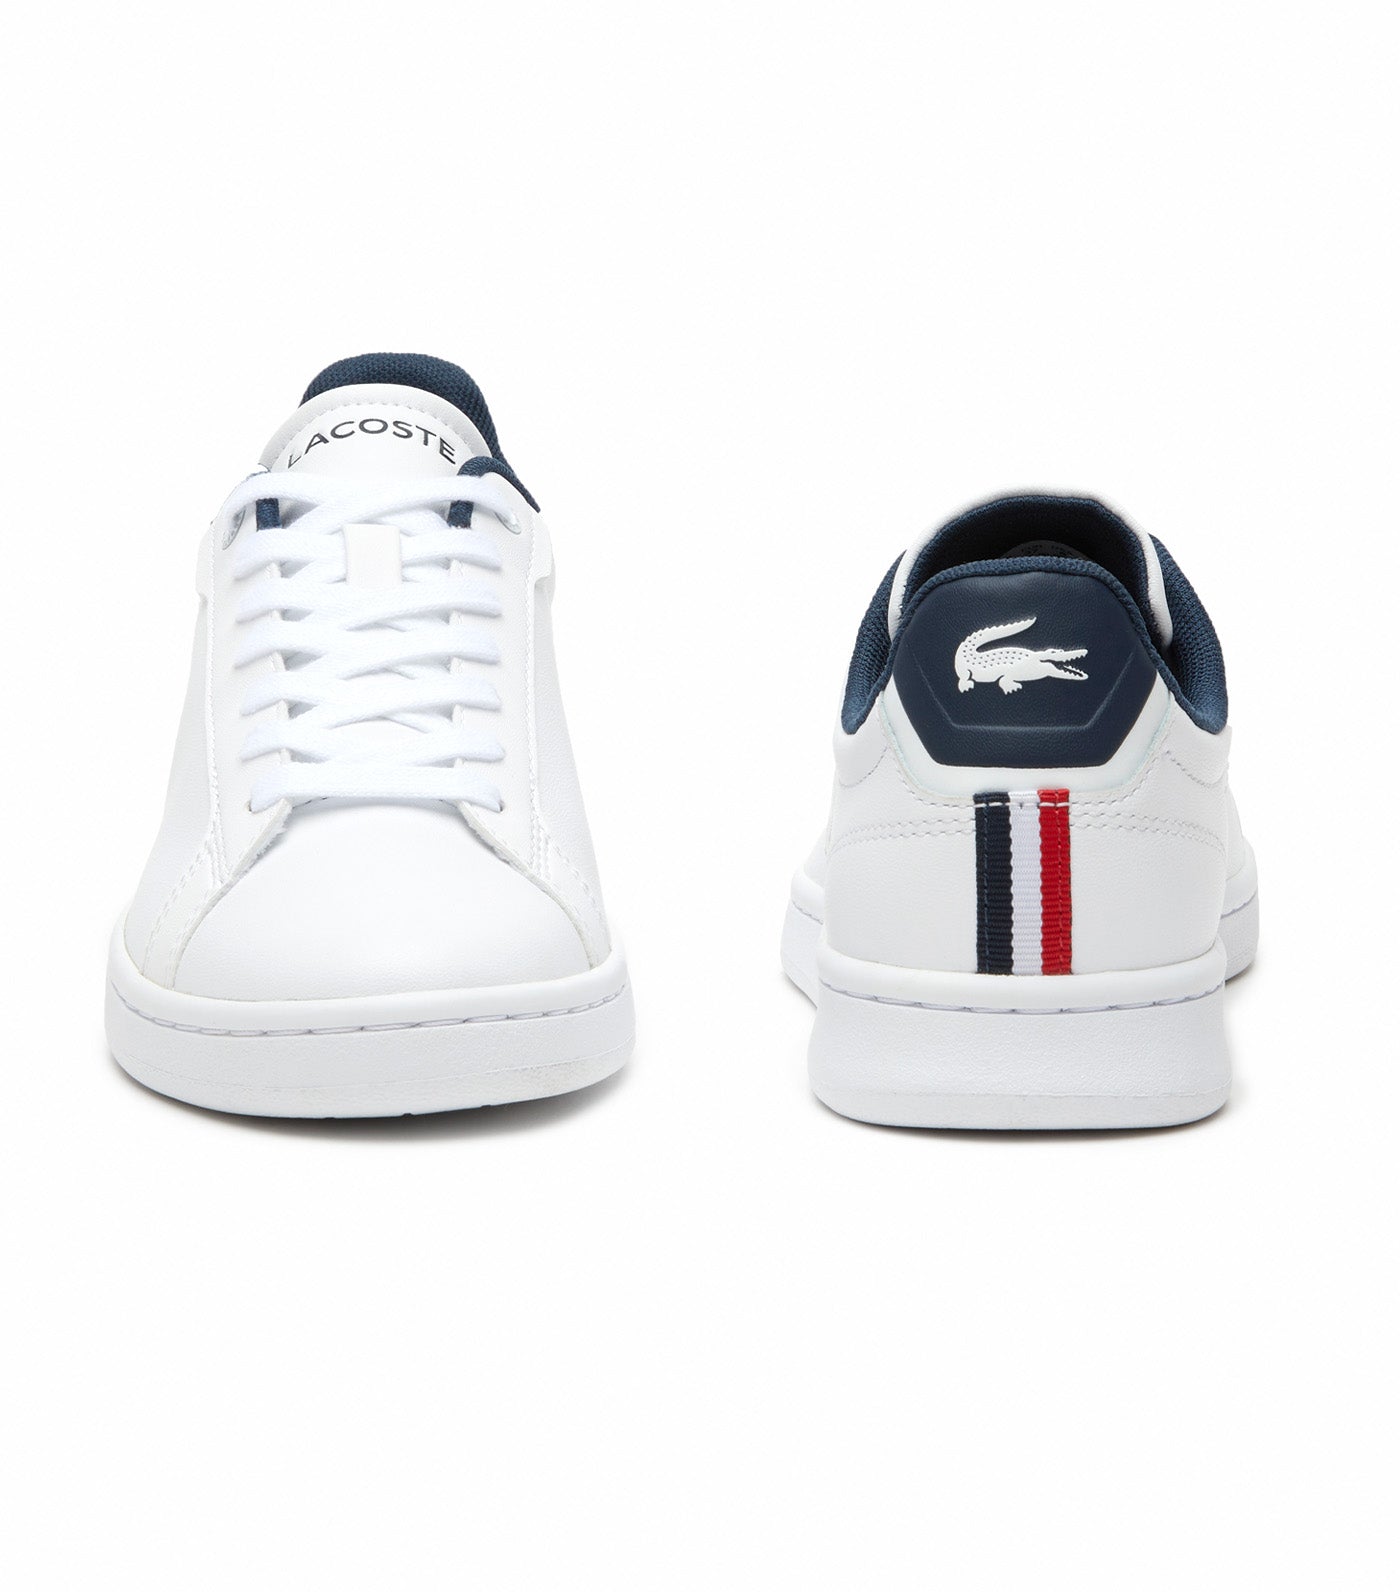 Women's Lacoste Carnaby Pro Leather Tricolour Trainers White/Navy/Red